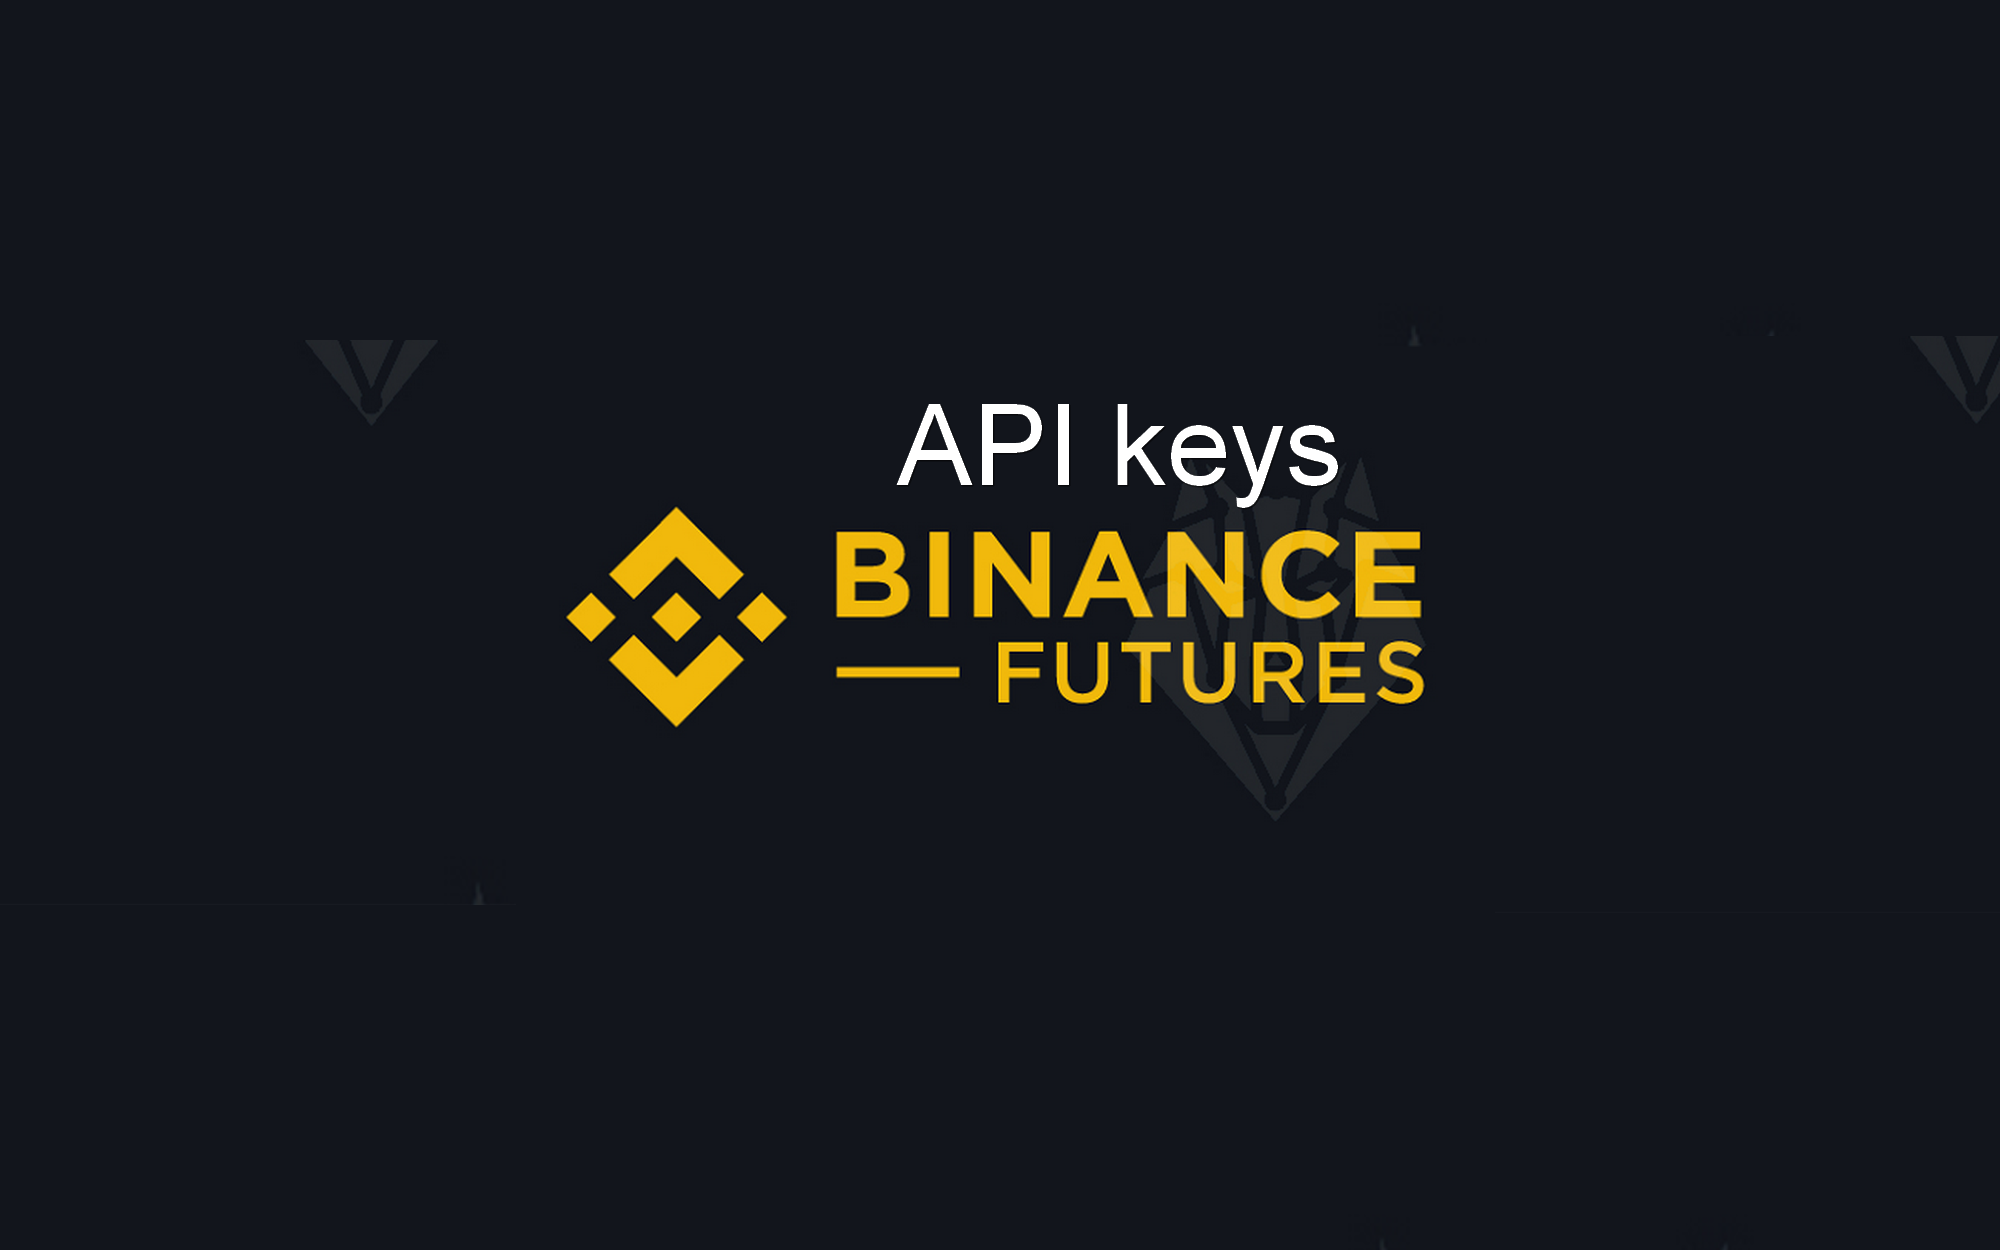 Instruction for creating an API key for trading futures on the Binance exchange